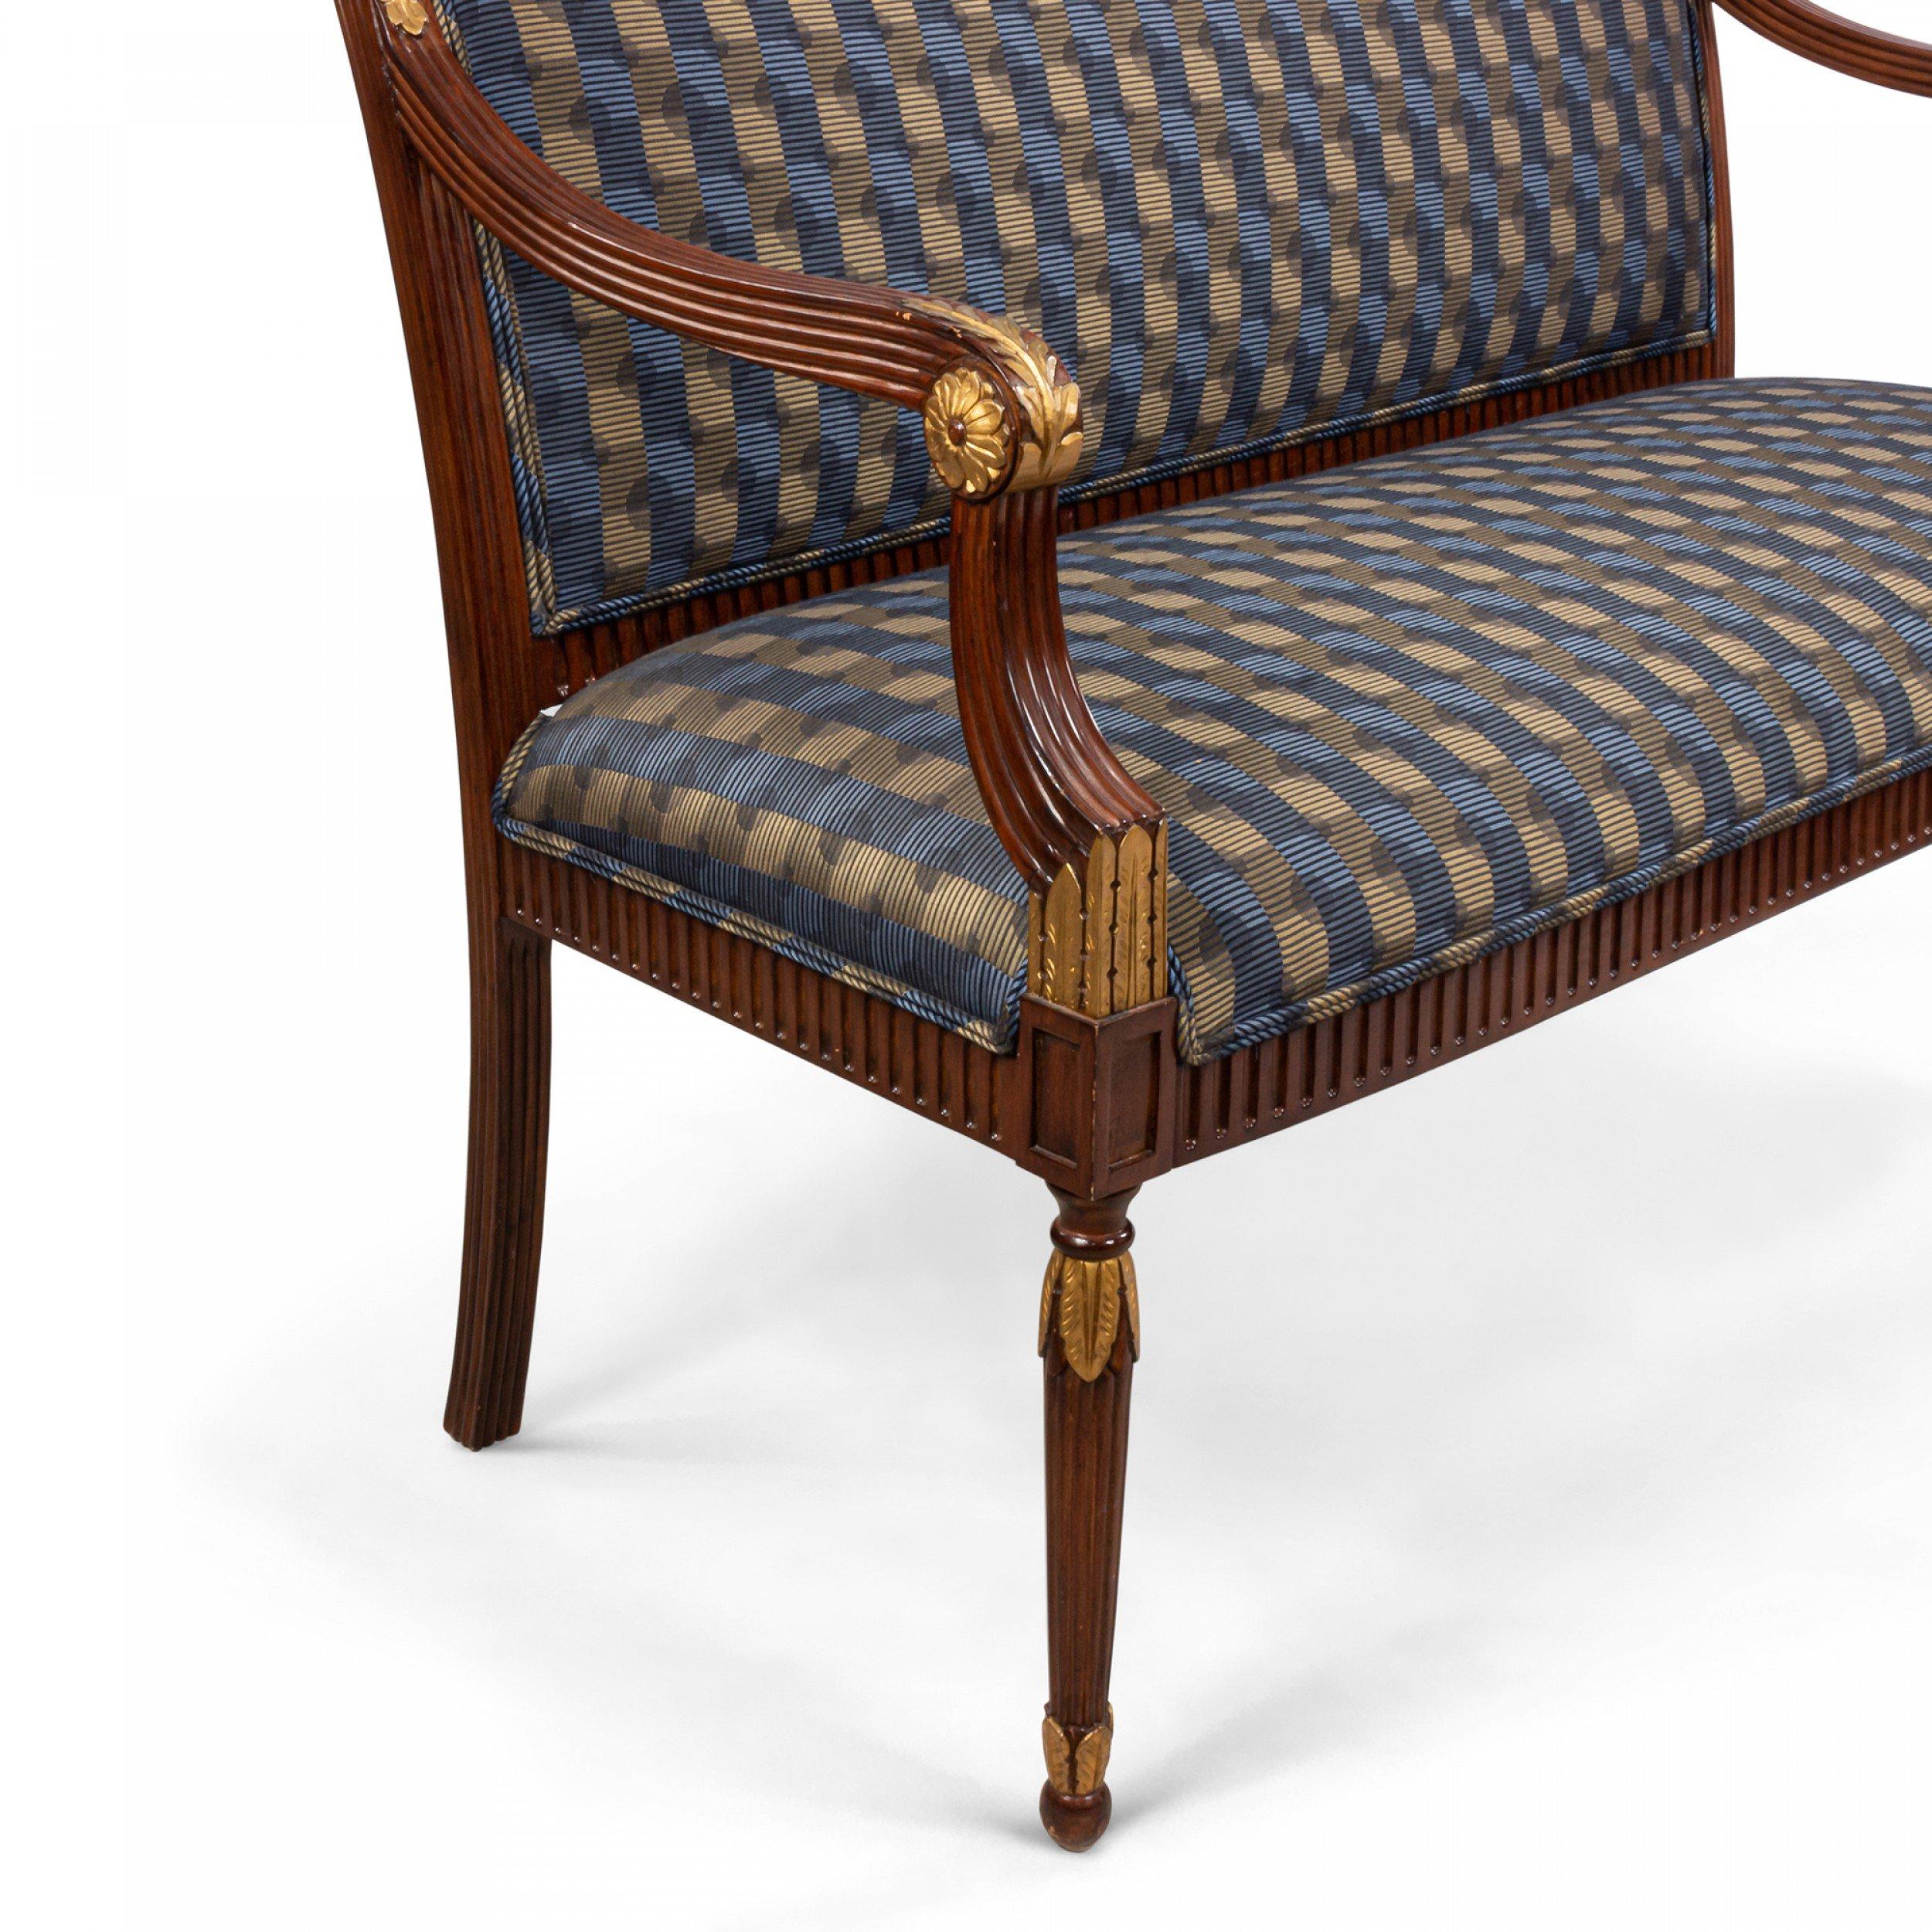 French Louis XVI Style Mahogany Settee with Blue Patterned Upholstery 3